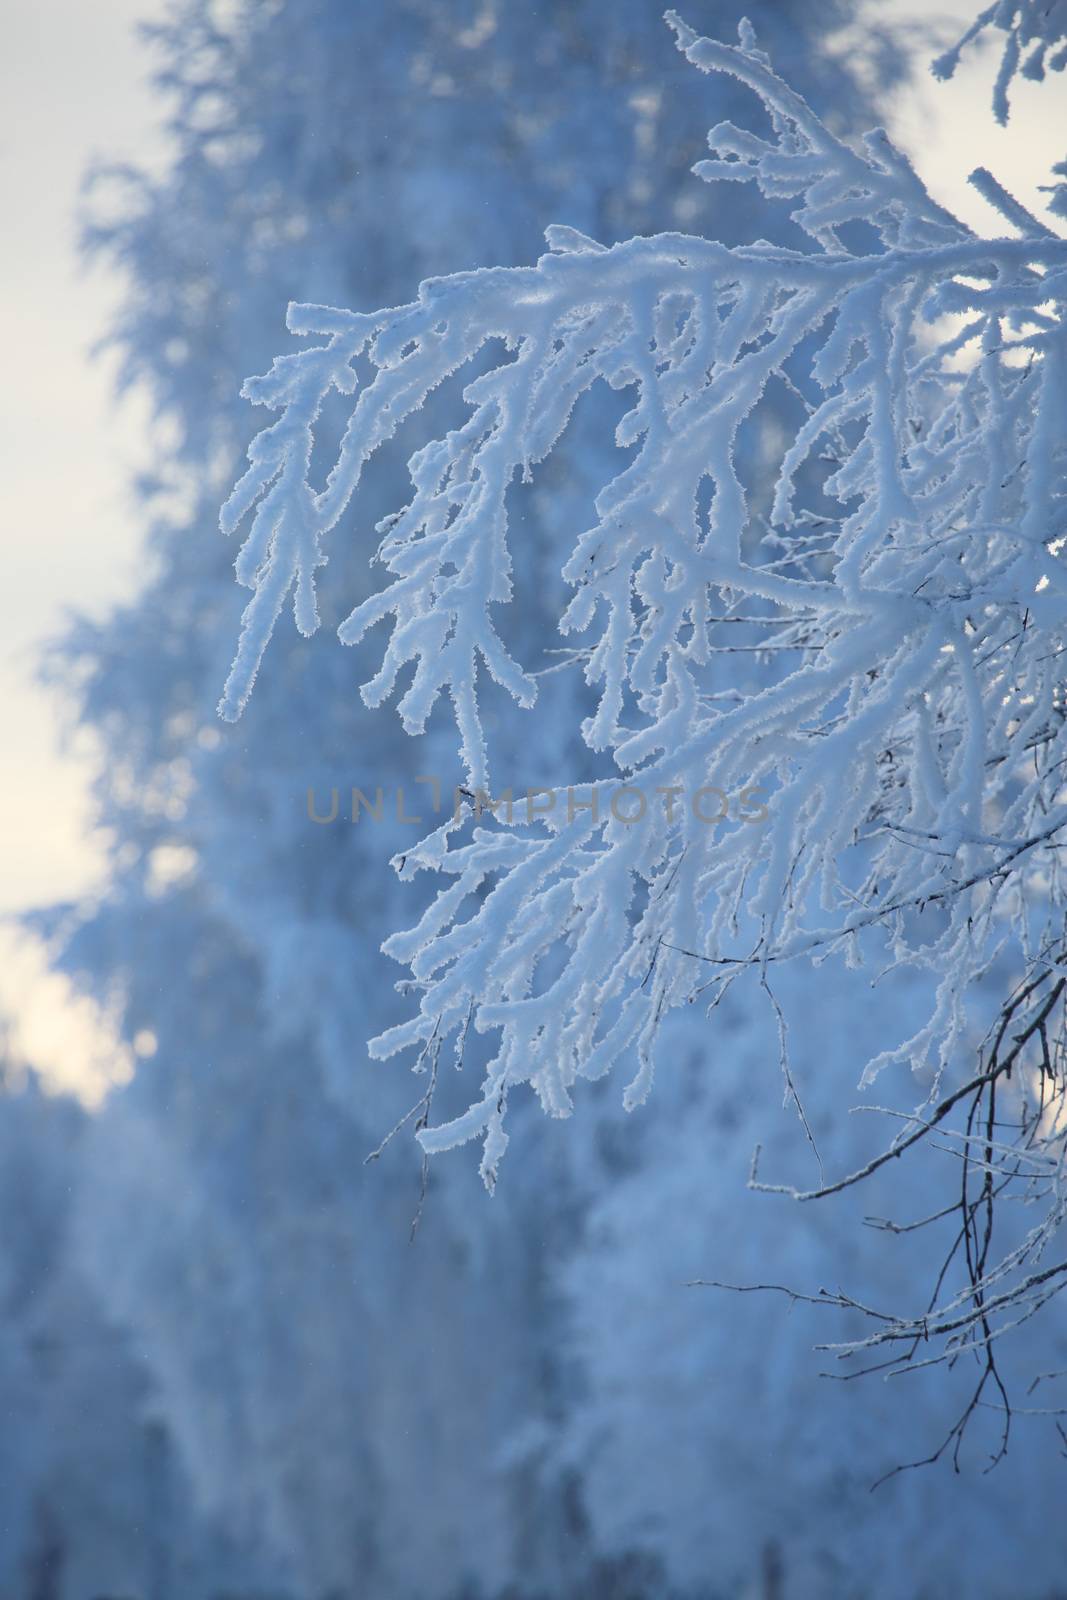 Hoarfrost on the trees in cold winter forest over blue sky background